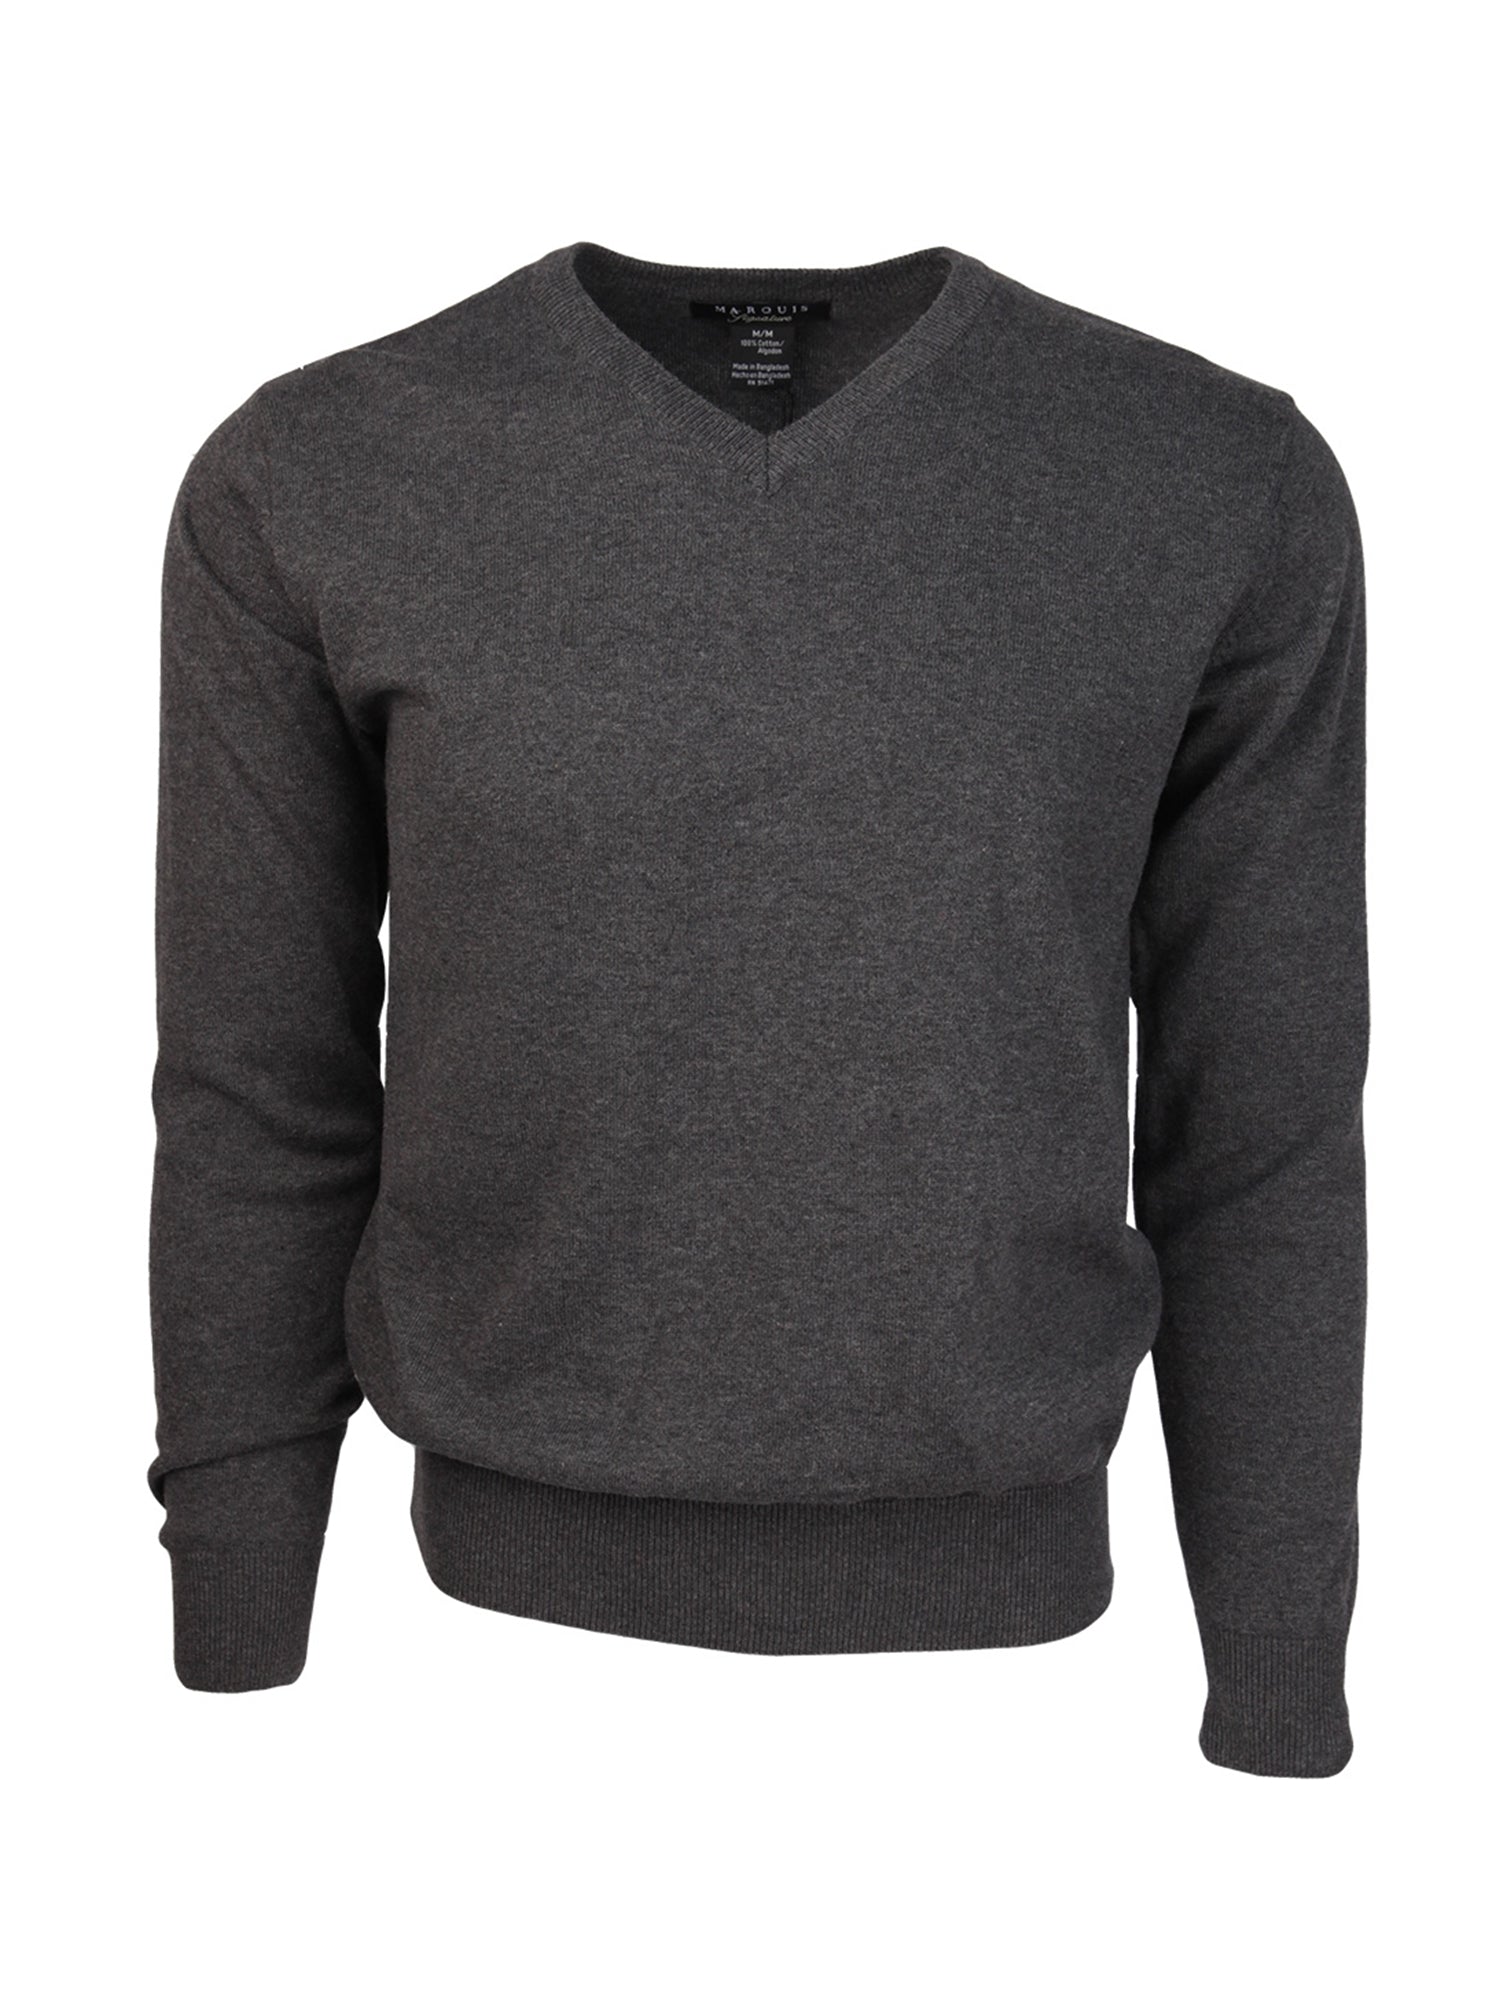 Men's Modern Fit Solid V-neck Cotton Sweater Sweater TheDapperTie Charcoal Small 